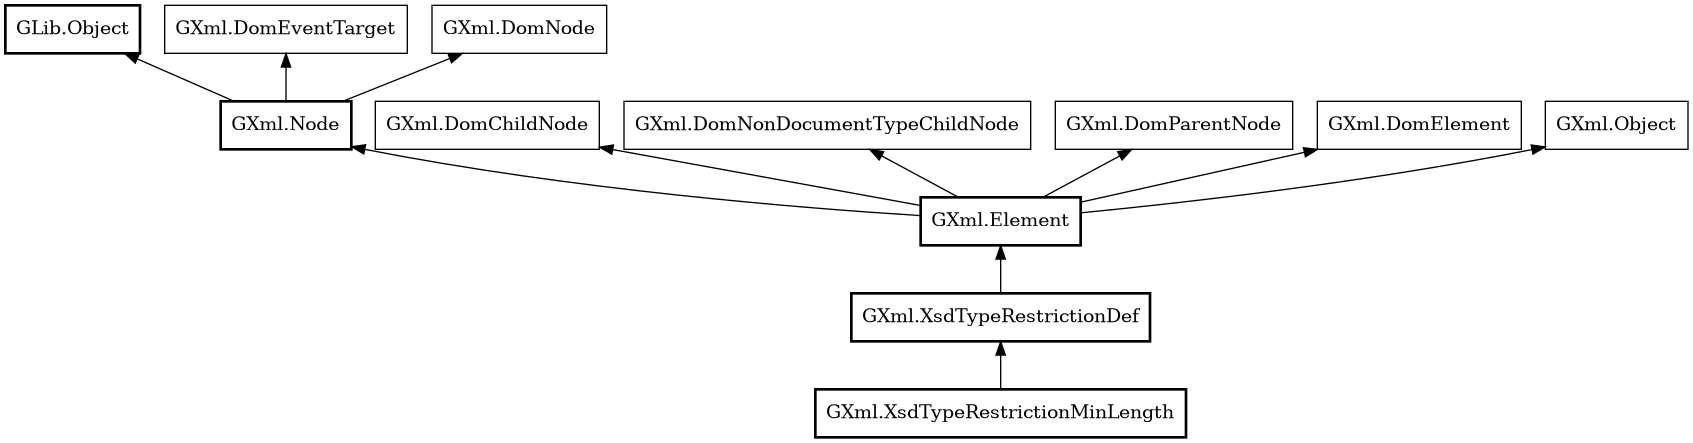 Object hierarchy for XsdTypeRestrictionMinLength